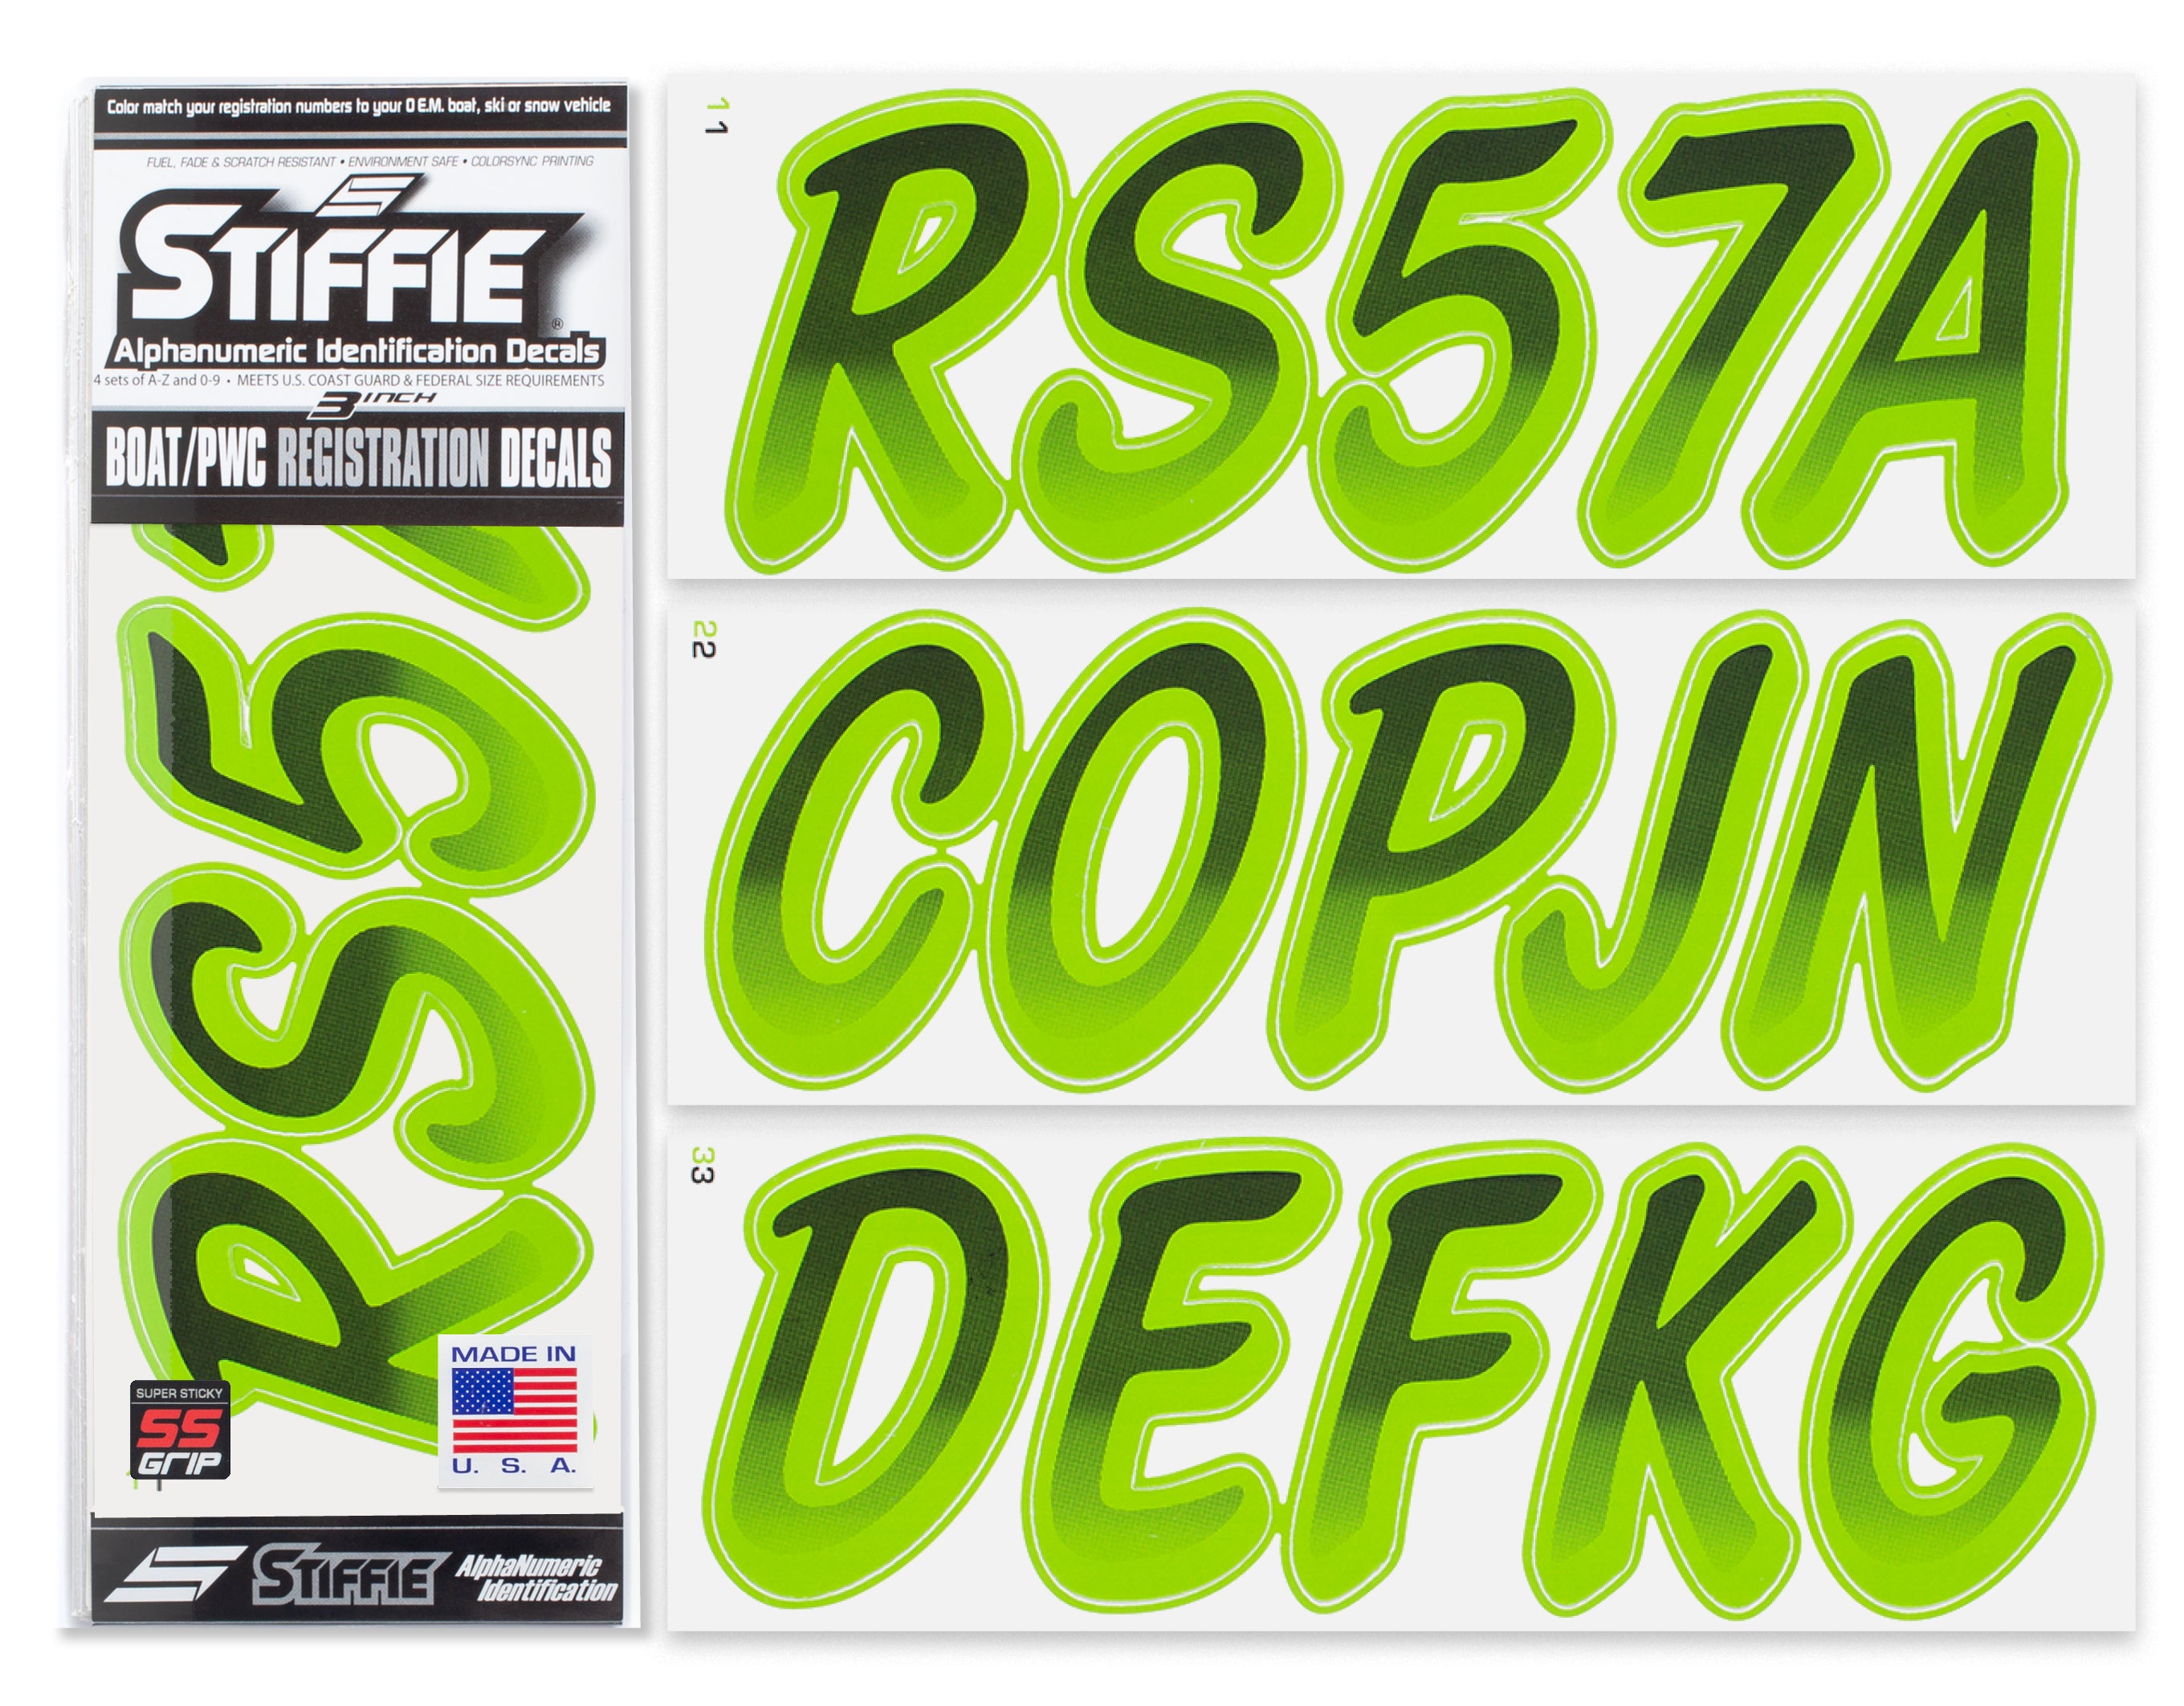 STIFFIE Whipline Black/Team Green Super Sticky 3" Alpha Numeric Registration Identification Numbers Stickers Decals for Sea-Doo Spark, Inflatable Boats, Ribs, Hypalon/PVC, PWC and Boats